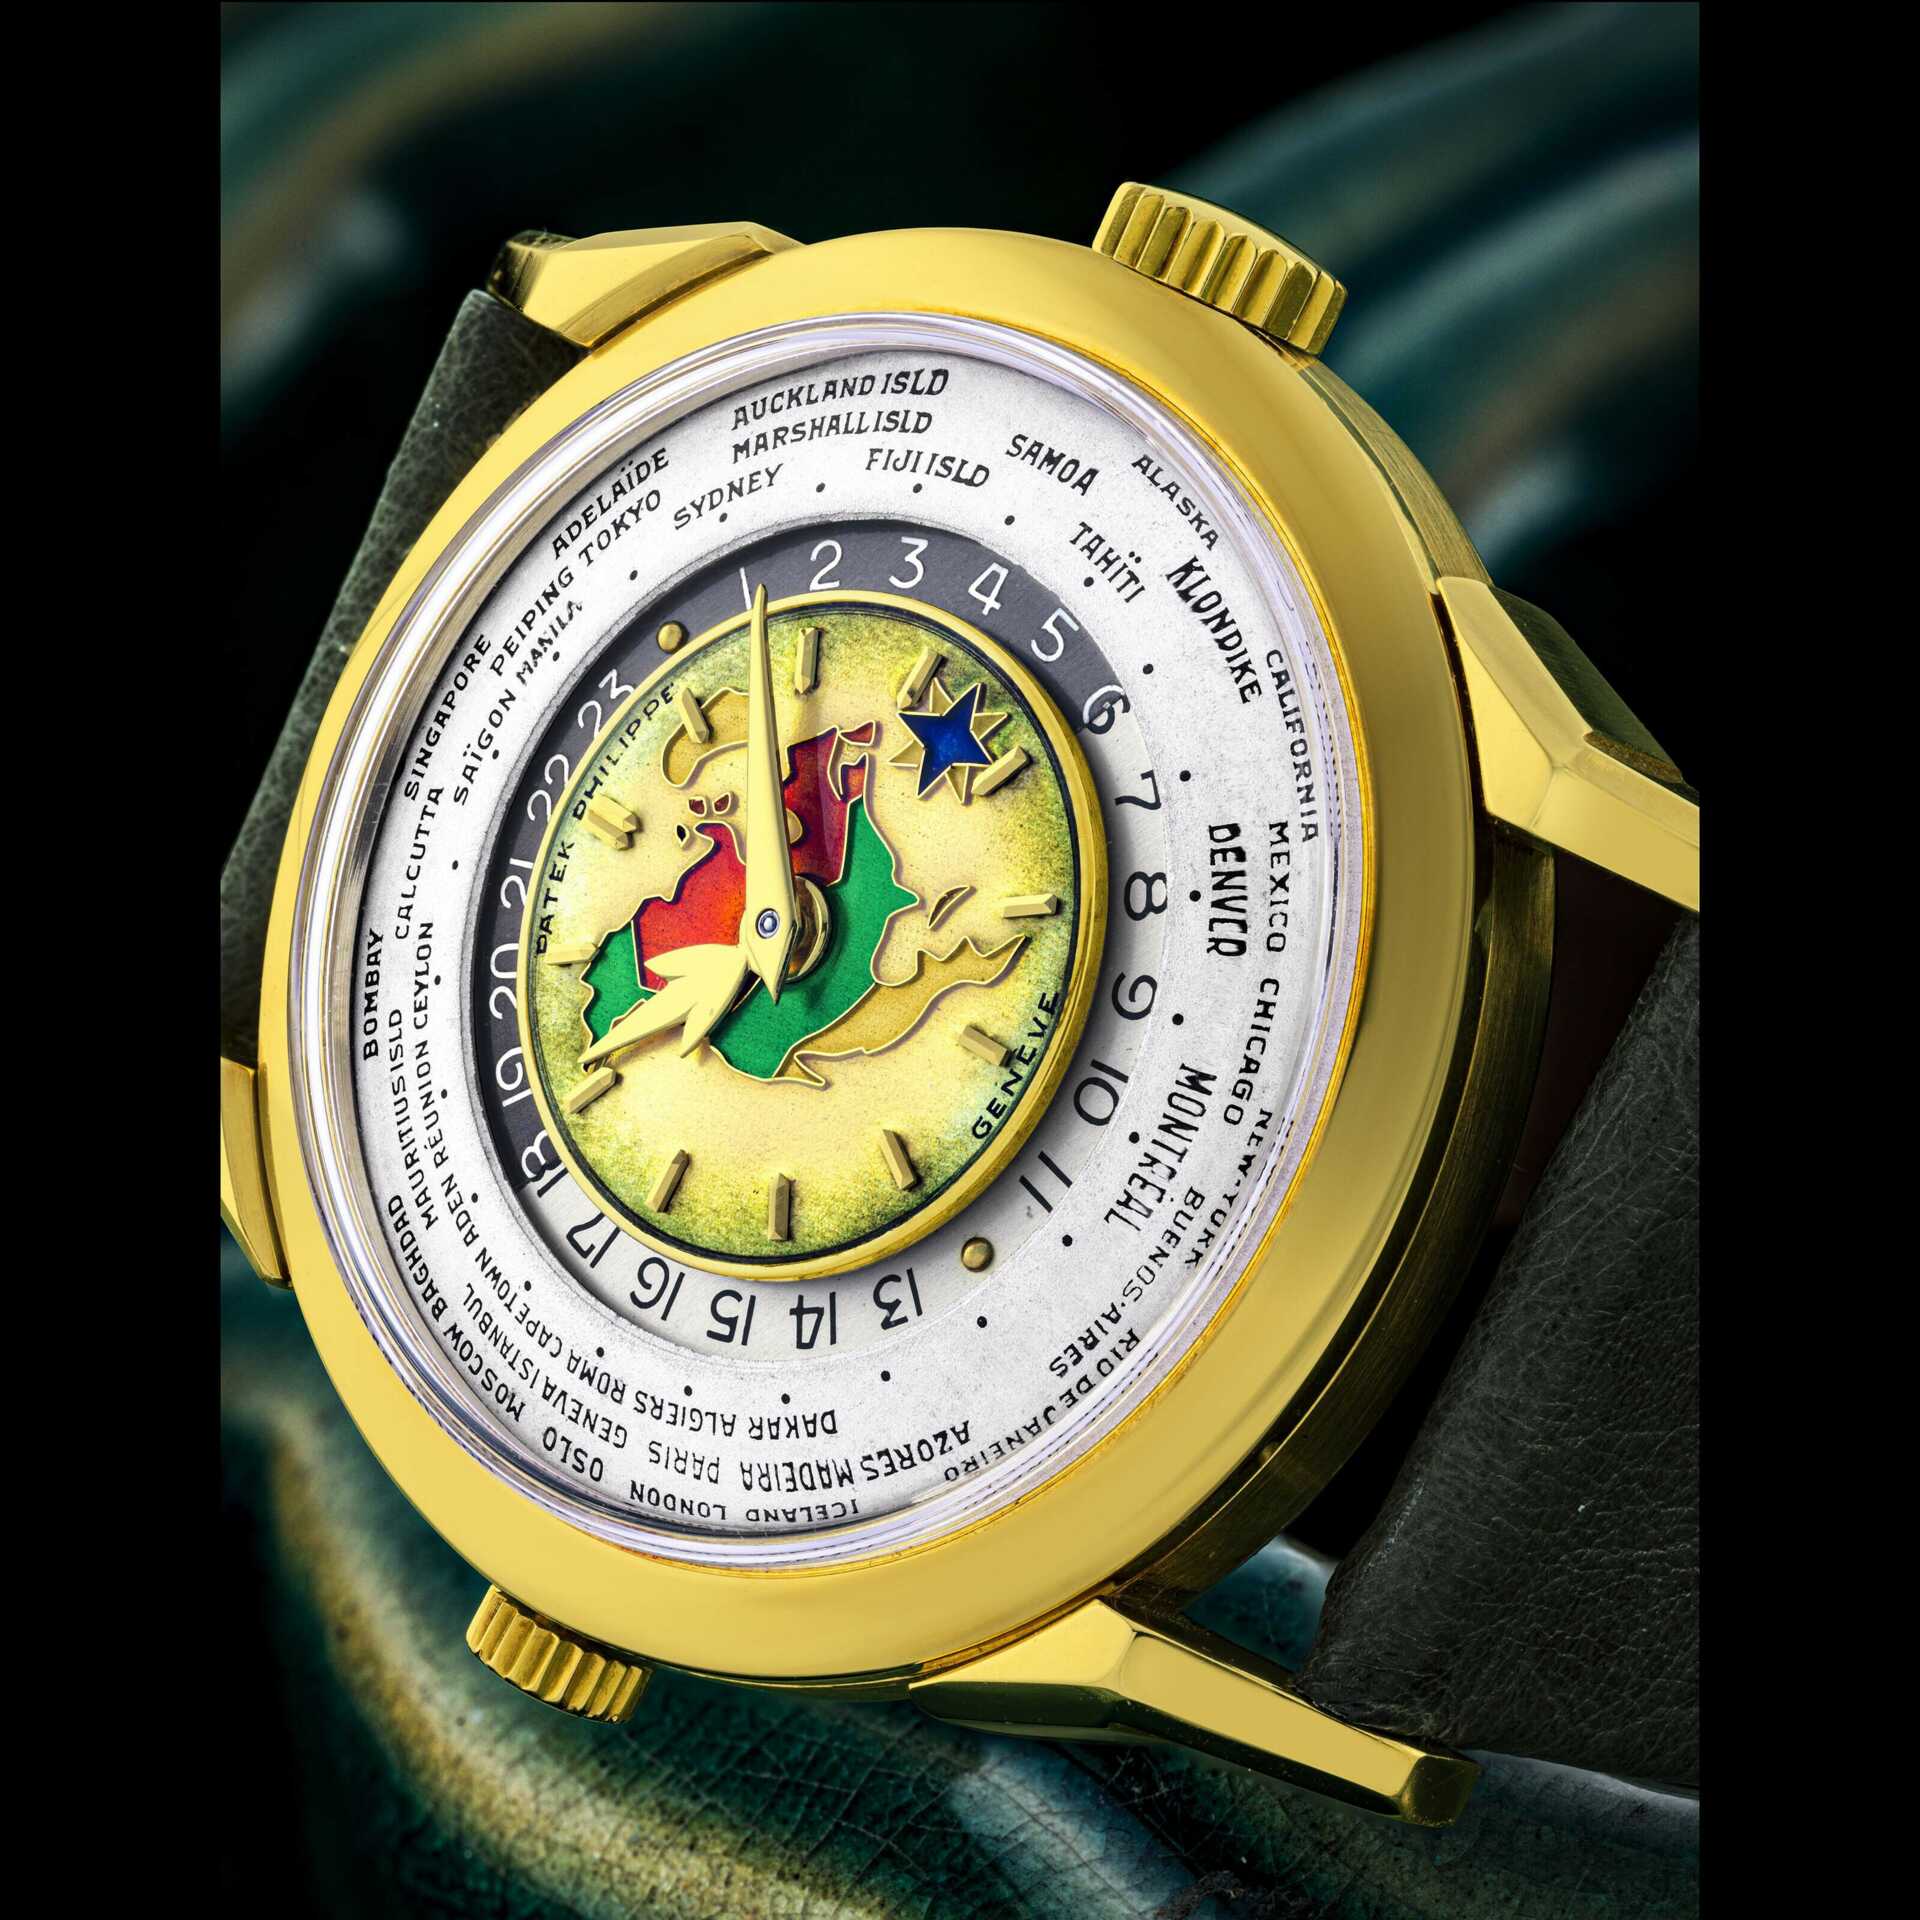 PATEK PHILIPPE. AN EXCEPTIONAL, HISTORICALLY AND HIGHLY IMPORTANT 18K GOLD TWO-CROWN WORLD TIME WRISTWATCH WITH 24 HOUR INDICATION AND CLOISONN&#201; ENAMEL DIAL DEPICTING THE NORTH AMERICAN MAP